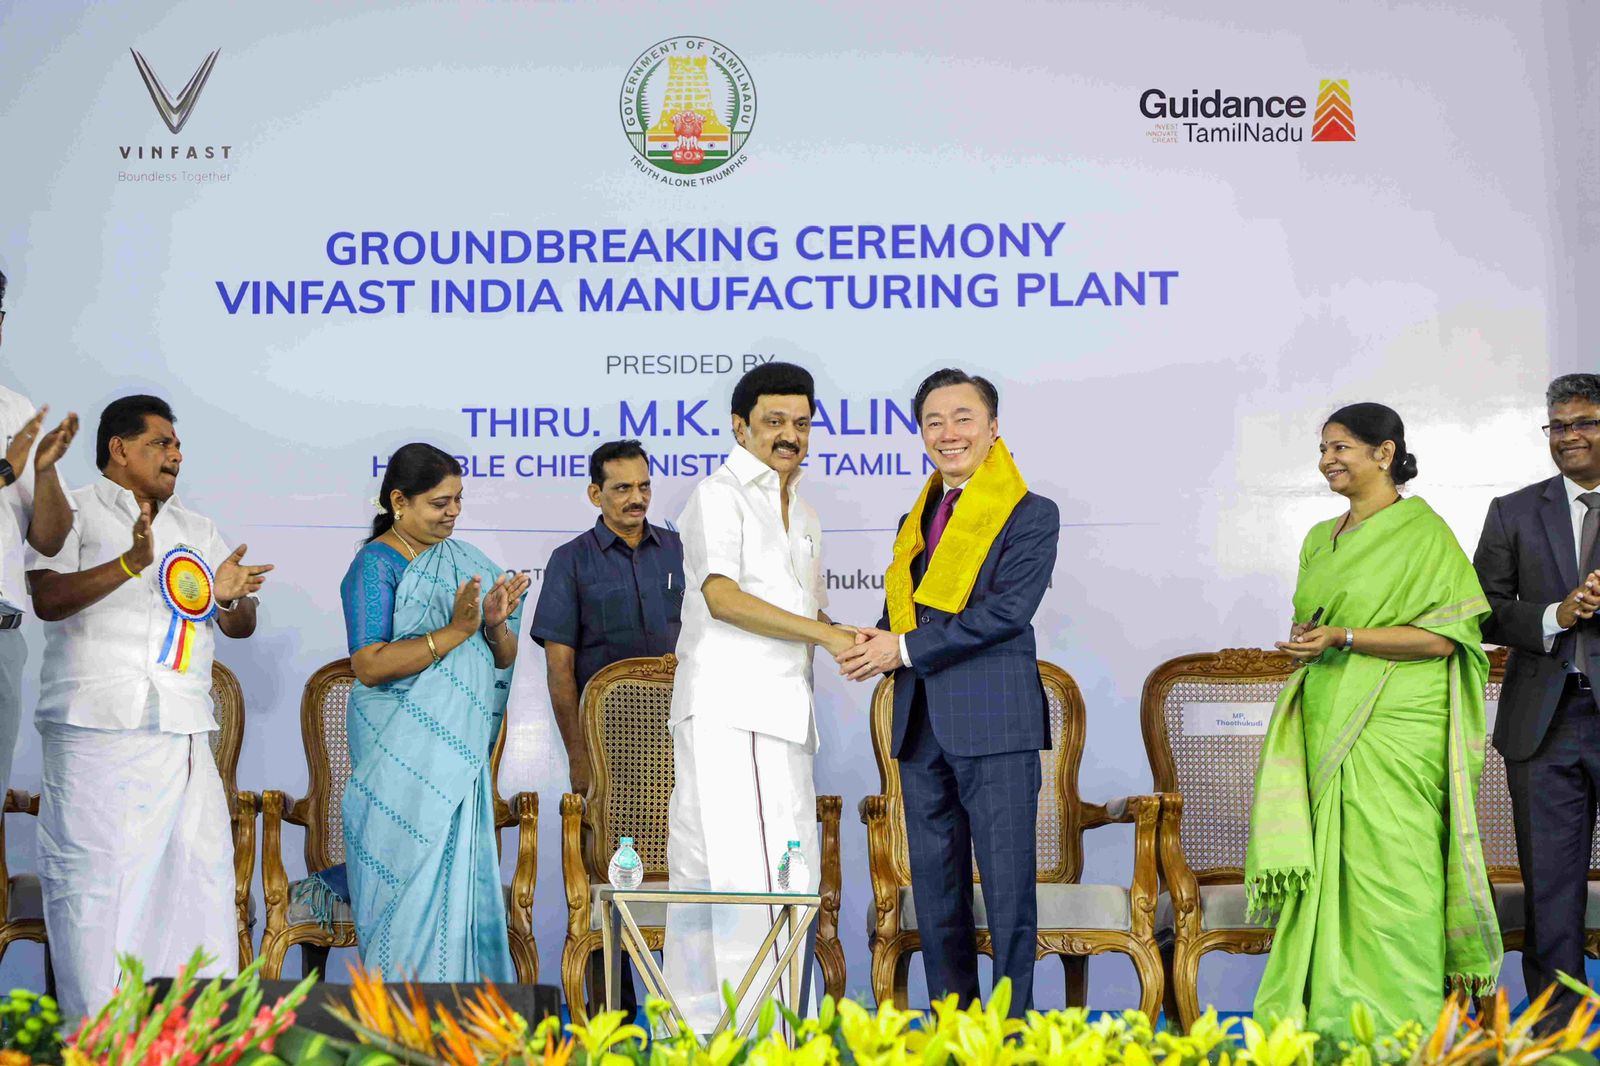 VinFast's groundbreaking ceremony for its plant in Thoothukudi, Tamil Nadu, is a significant stride towards sustainable and green mobility in India.